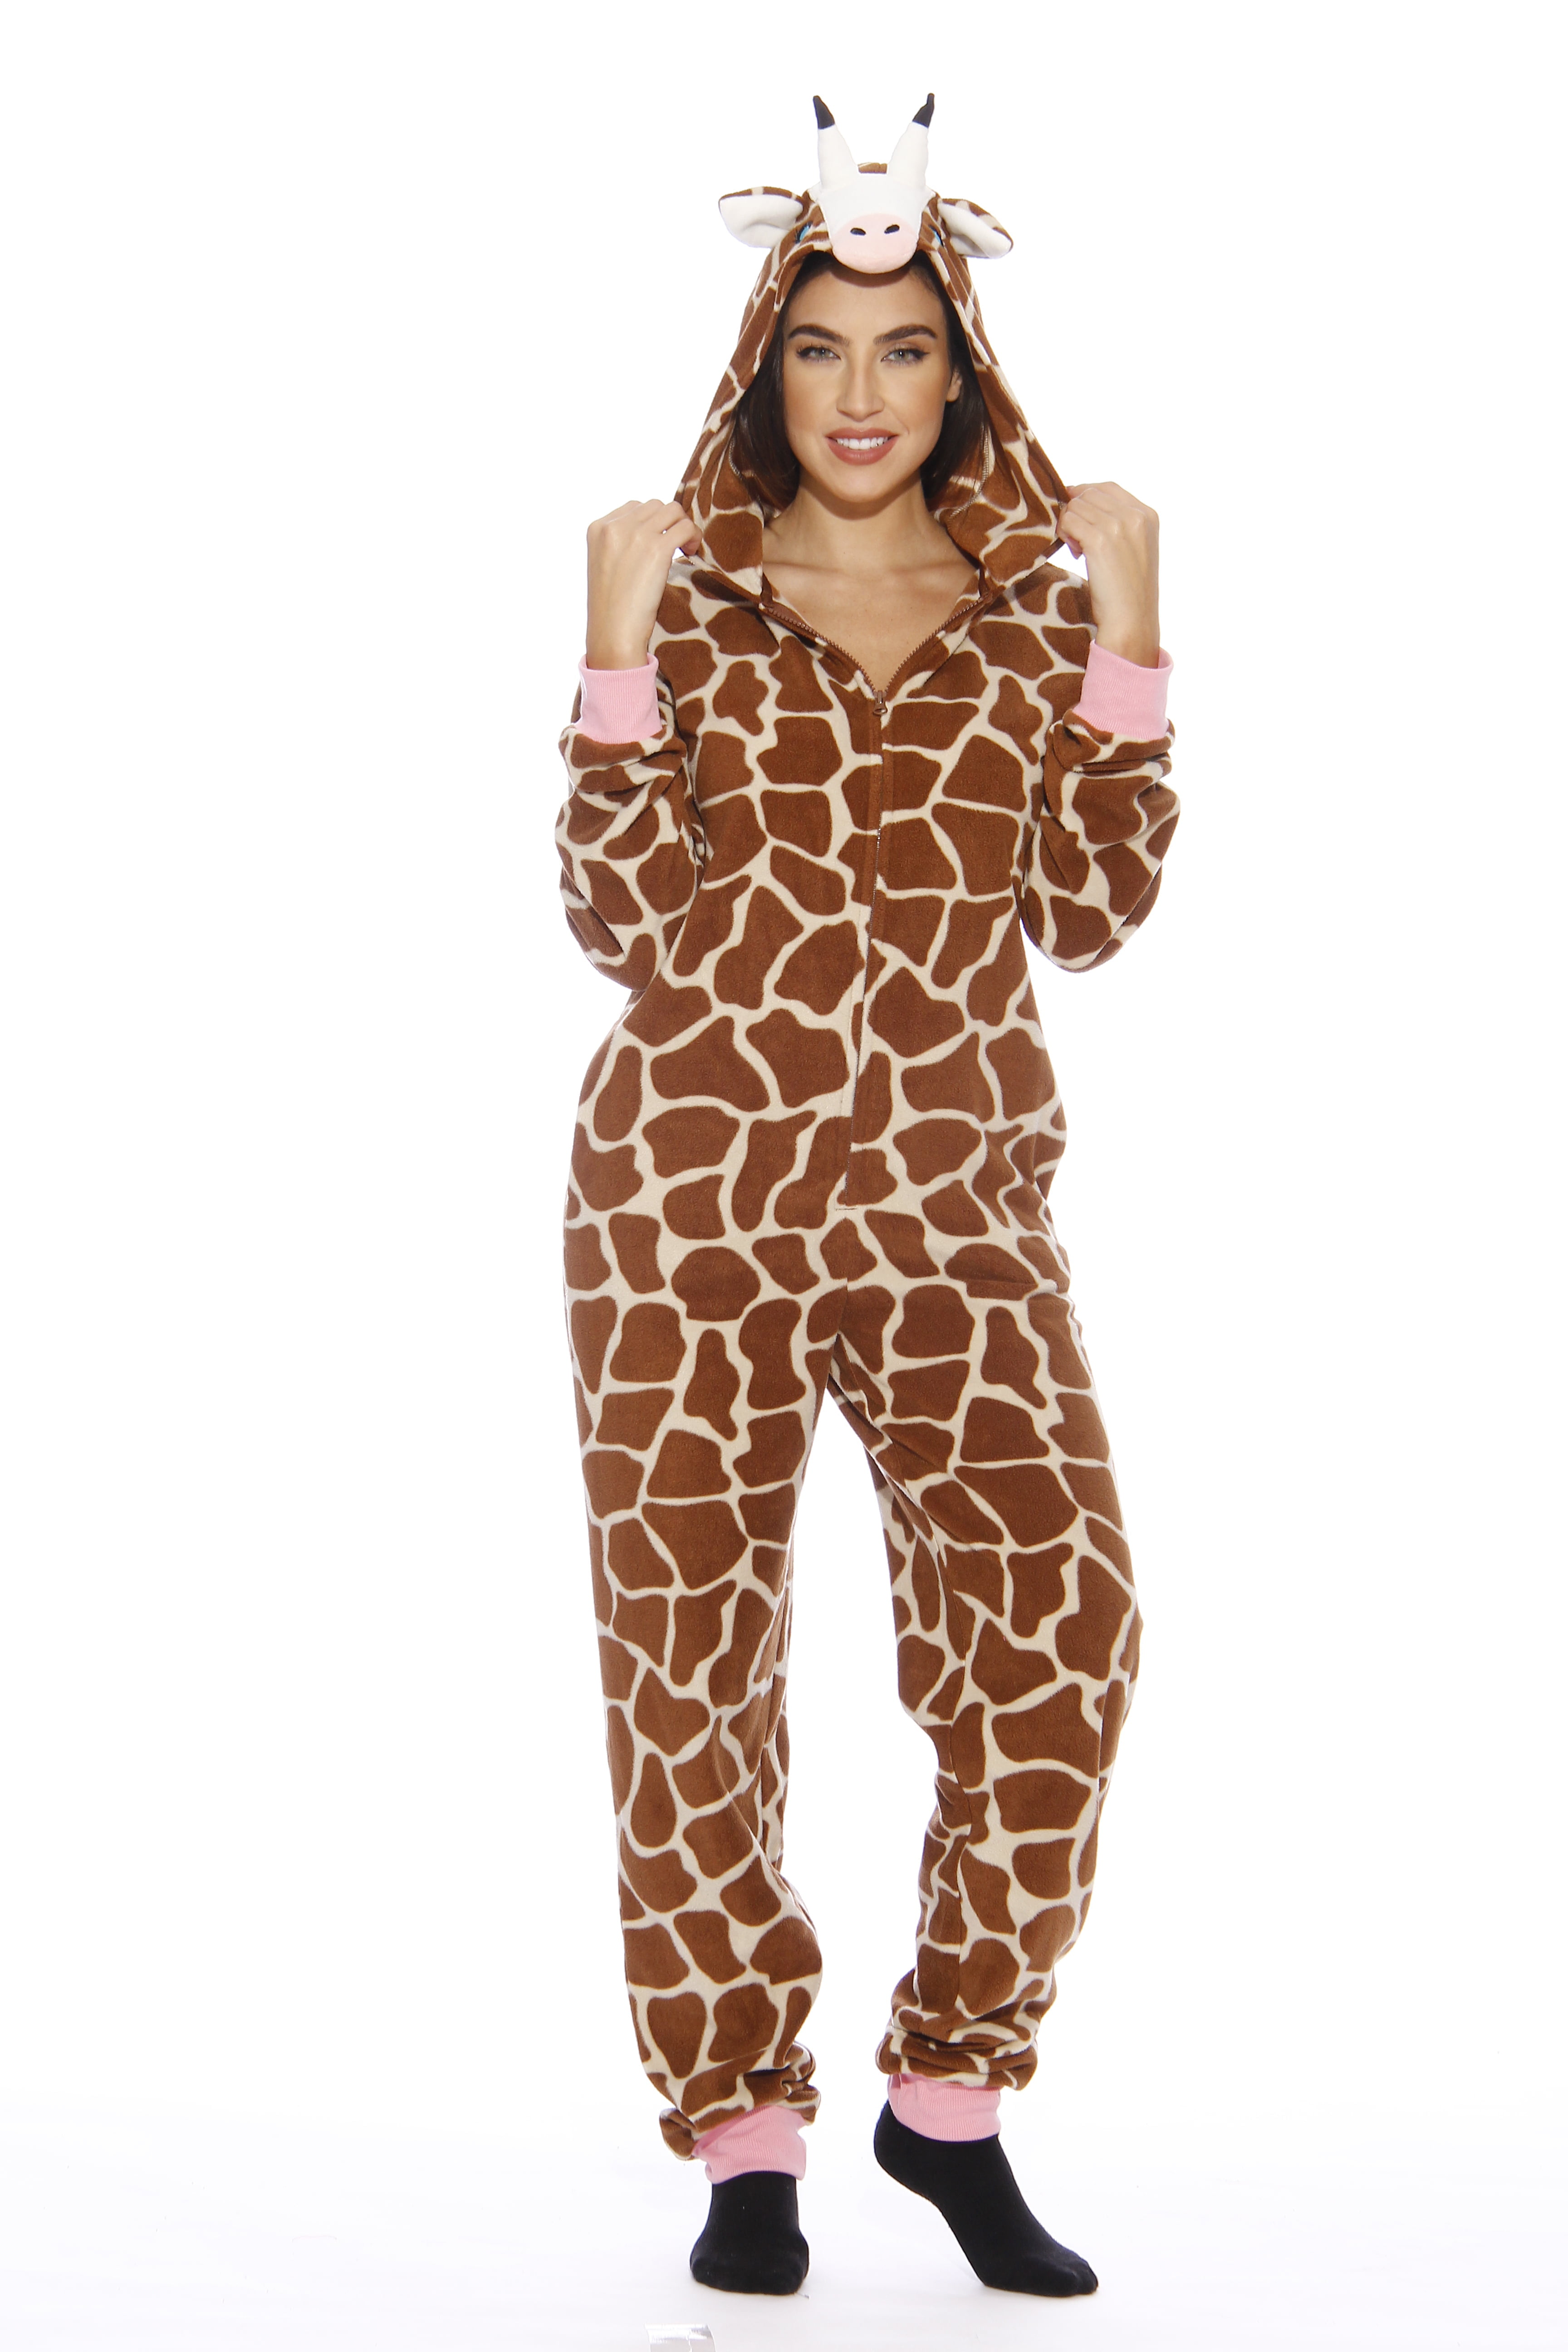 Just Love Comfortable and Cute Adult Animal Onesie Pajamas - Perfect for  Lounging and Sleepwear (Giraffe, X-Large) 